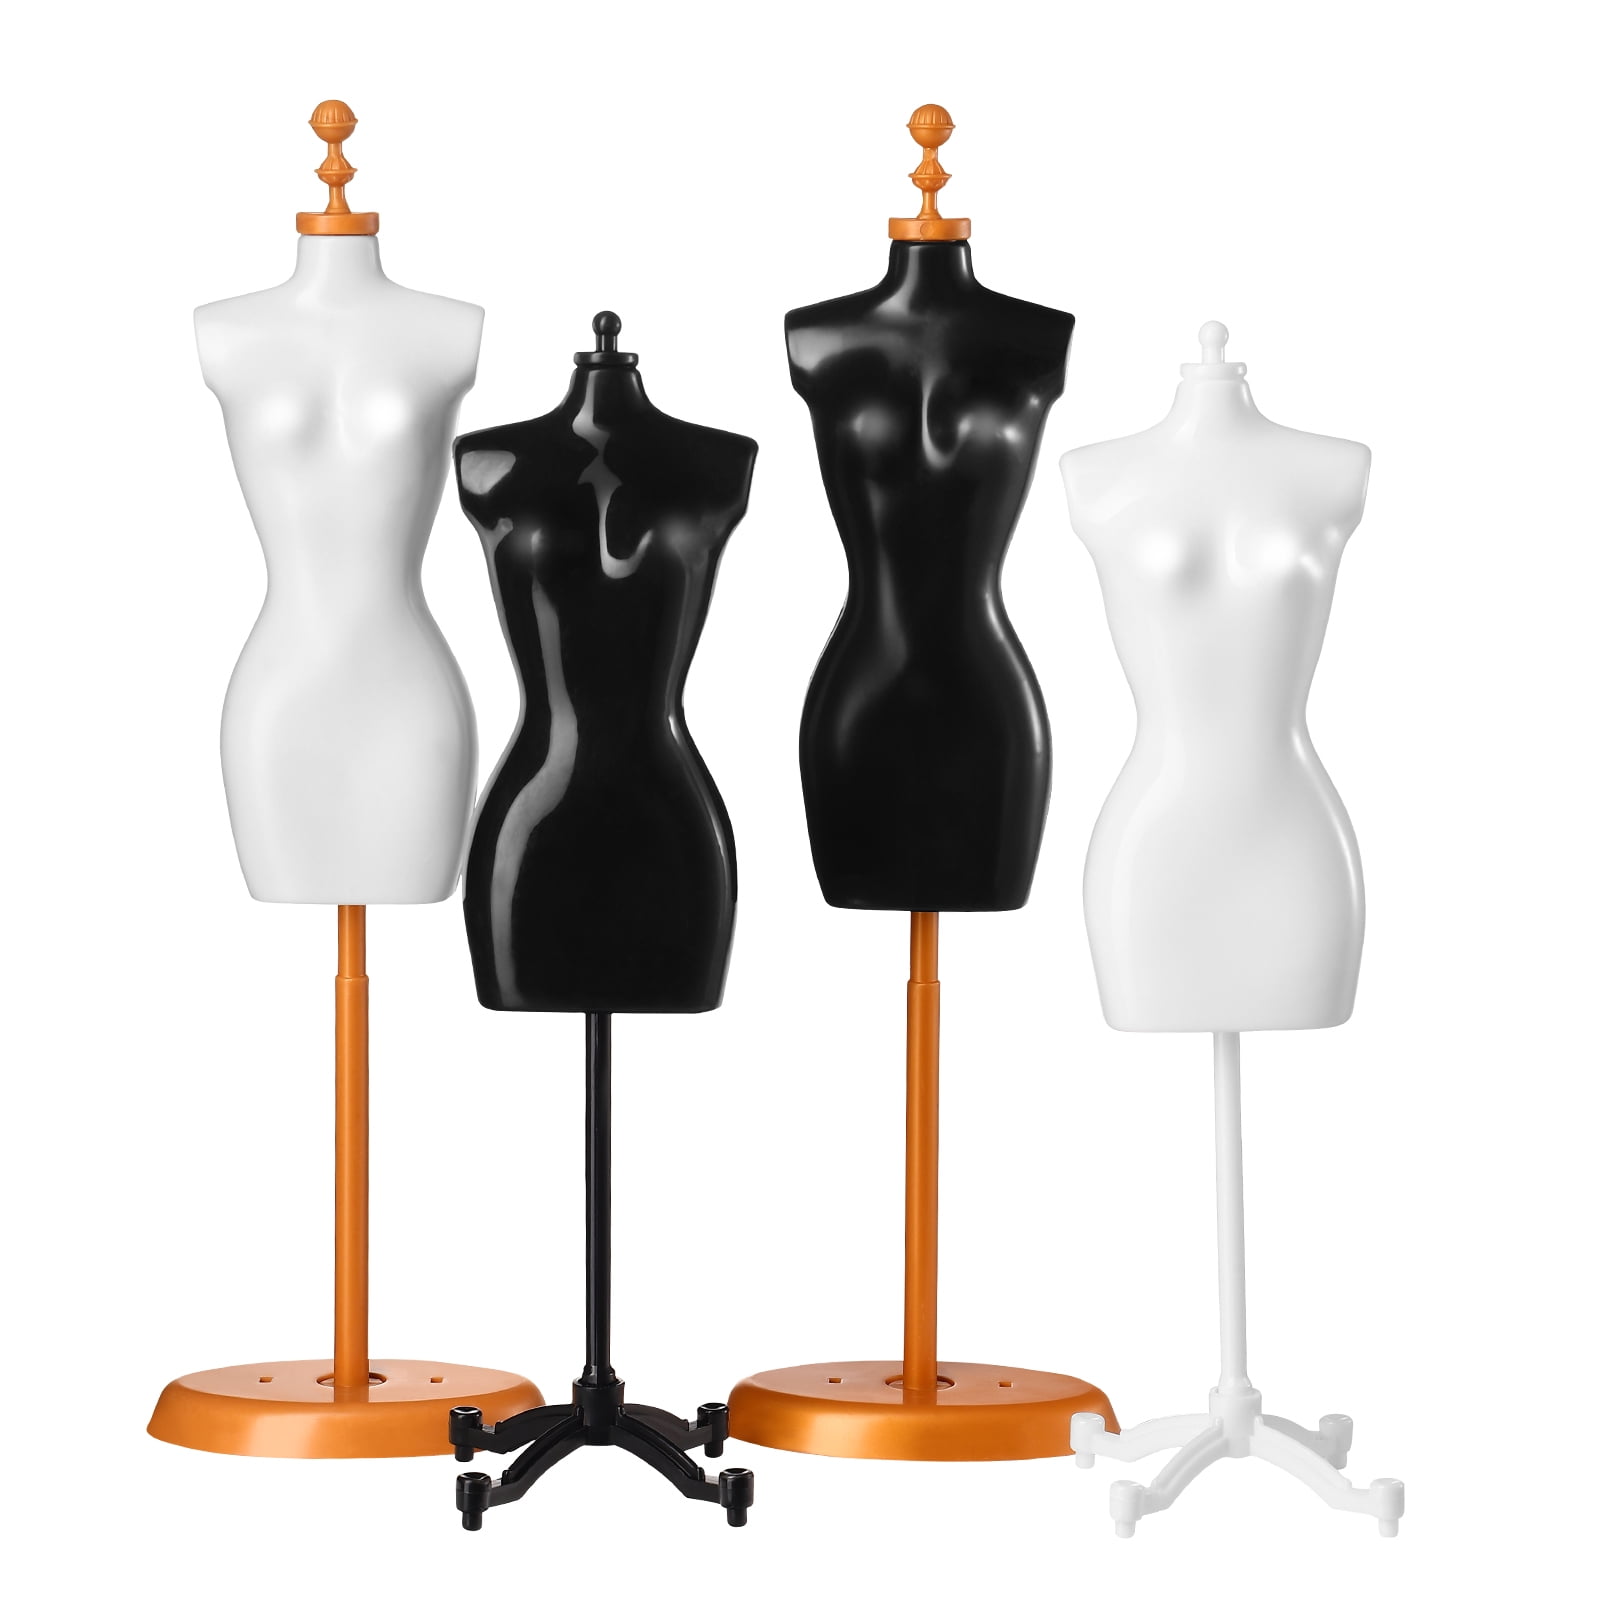 Clothes Dress Gown Outfit Mannequin Model Stand Holder Display for  DollES 